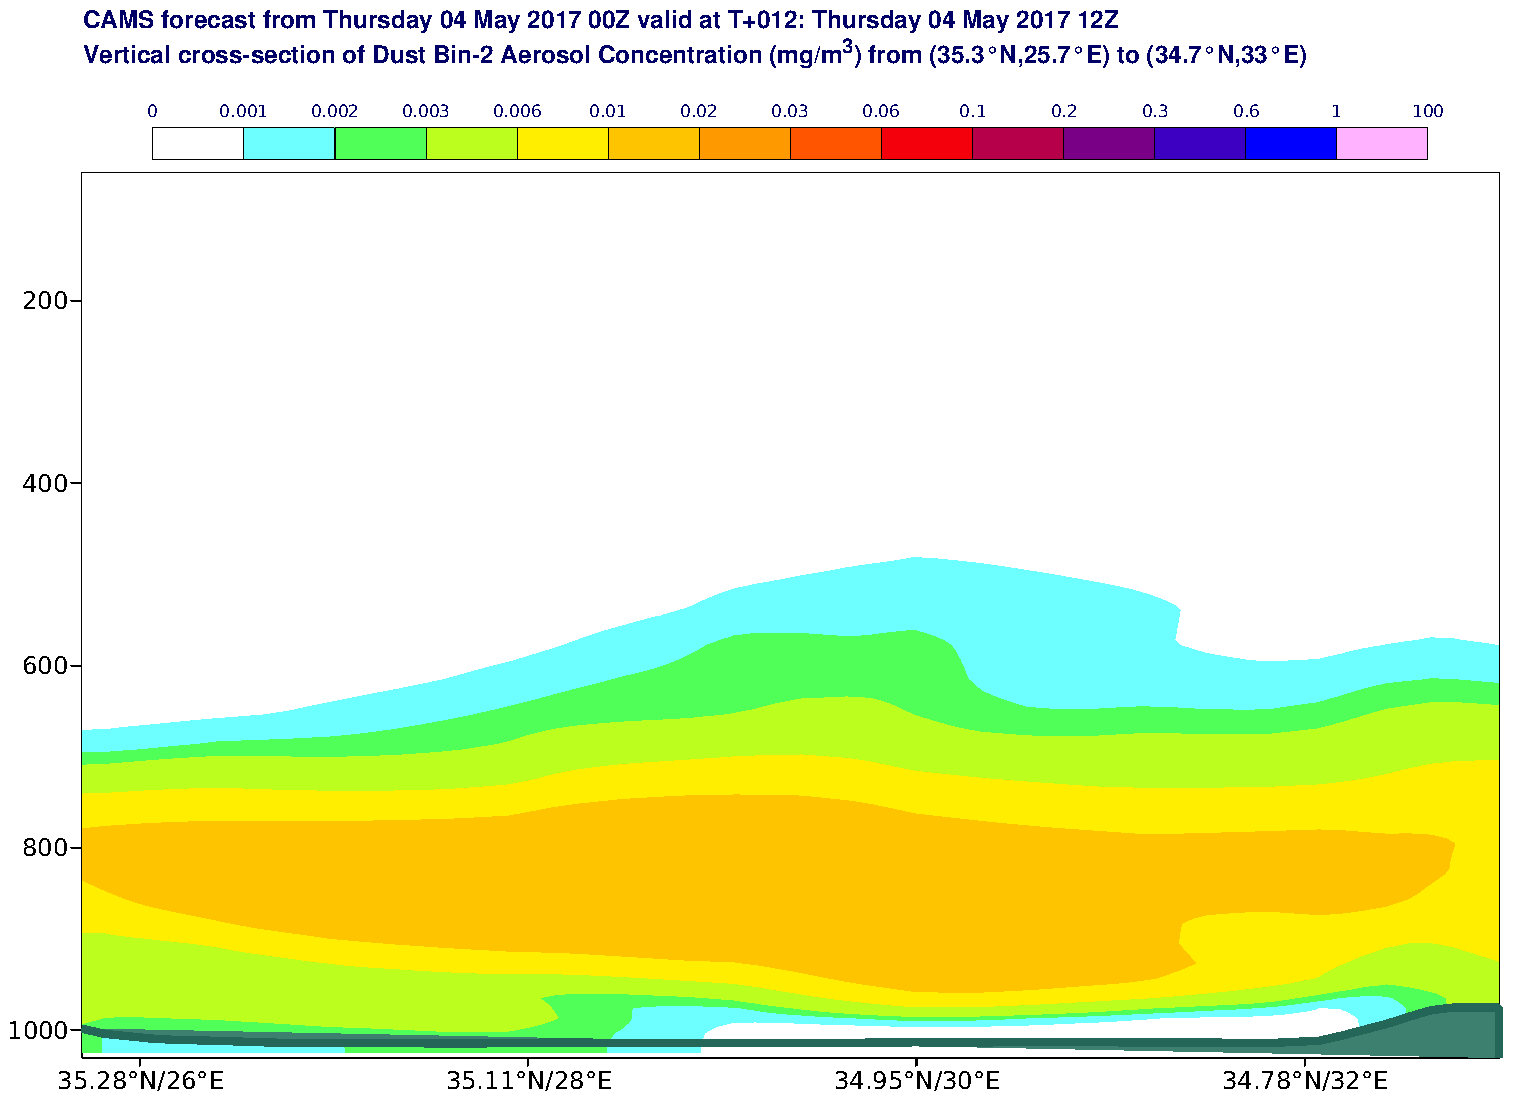 Vertical cross-section of Dust Bin-2 Aerosol Concentration (mg/m3) valid at T12 - 2017-05-04 12:00